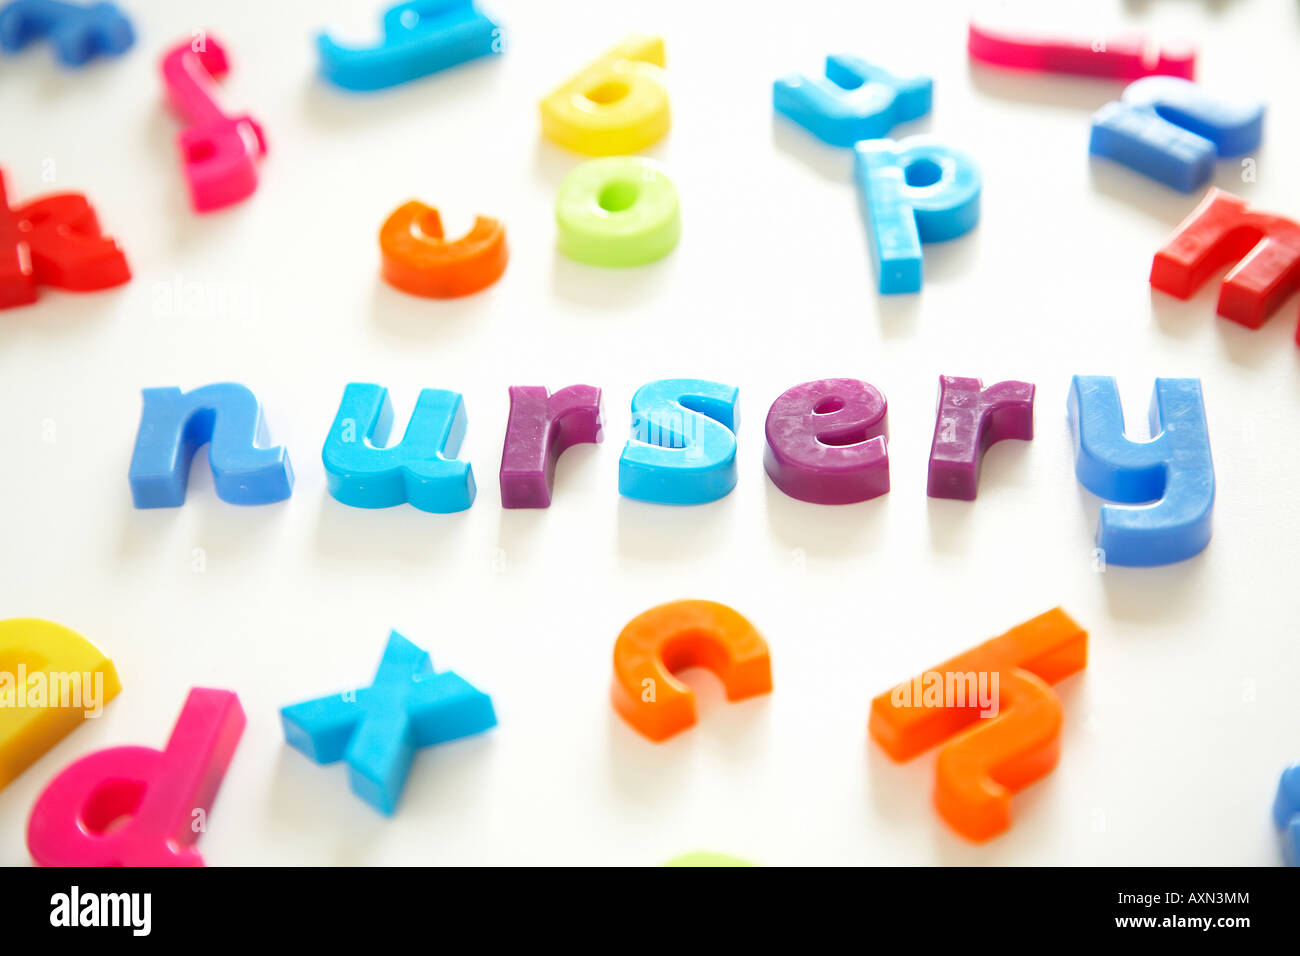 Alphabet magnetic childrens learning letters spelling out Nursery. Stock Photo